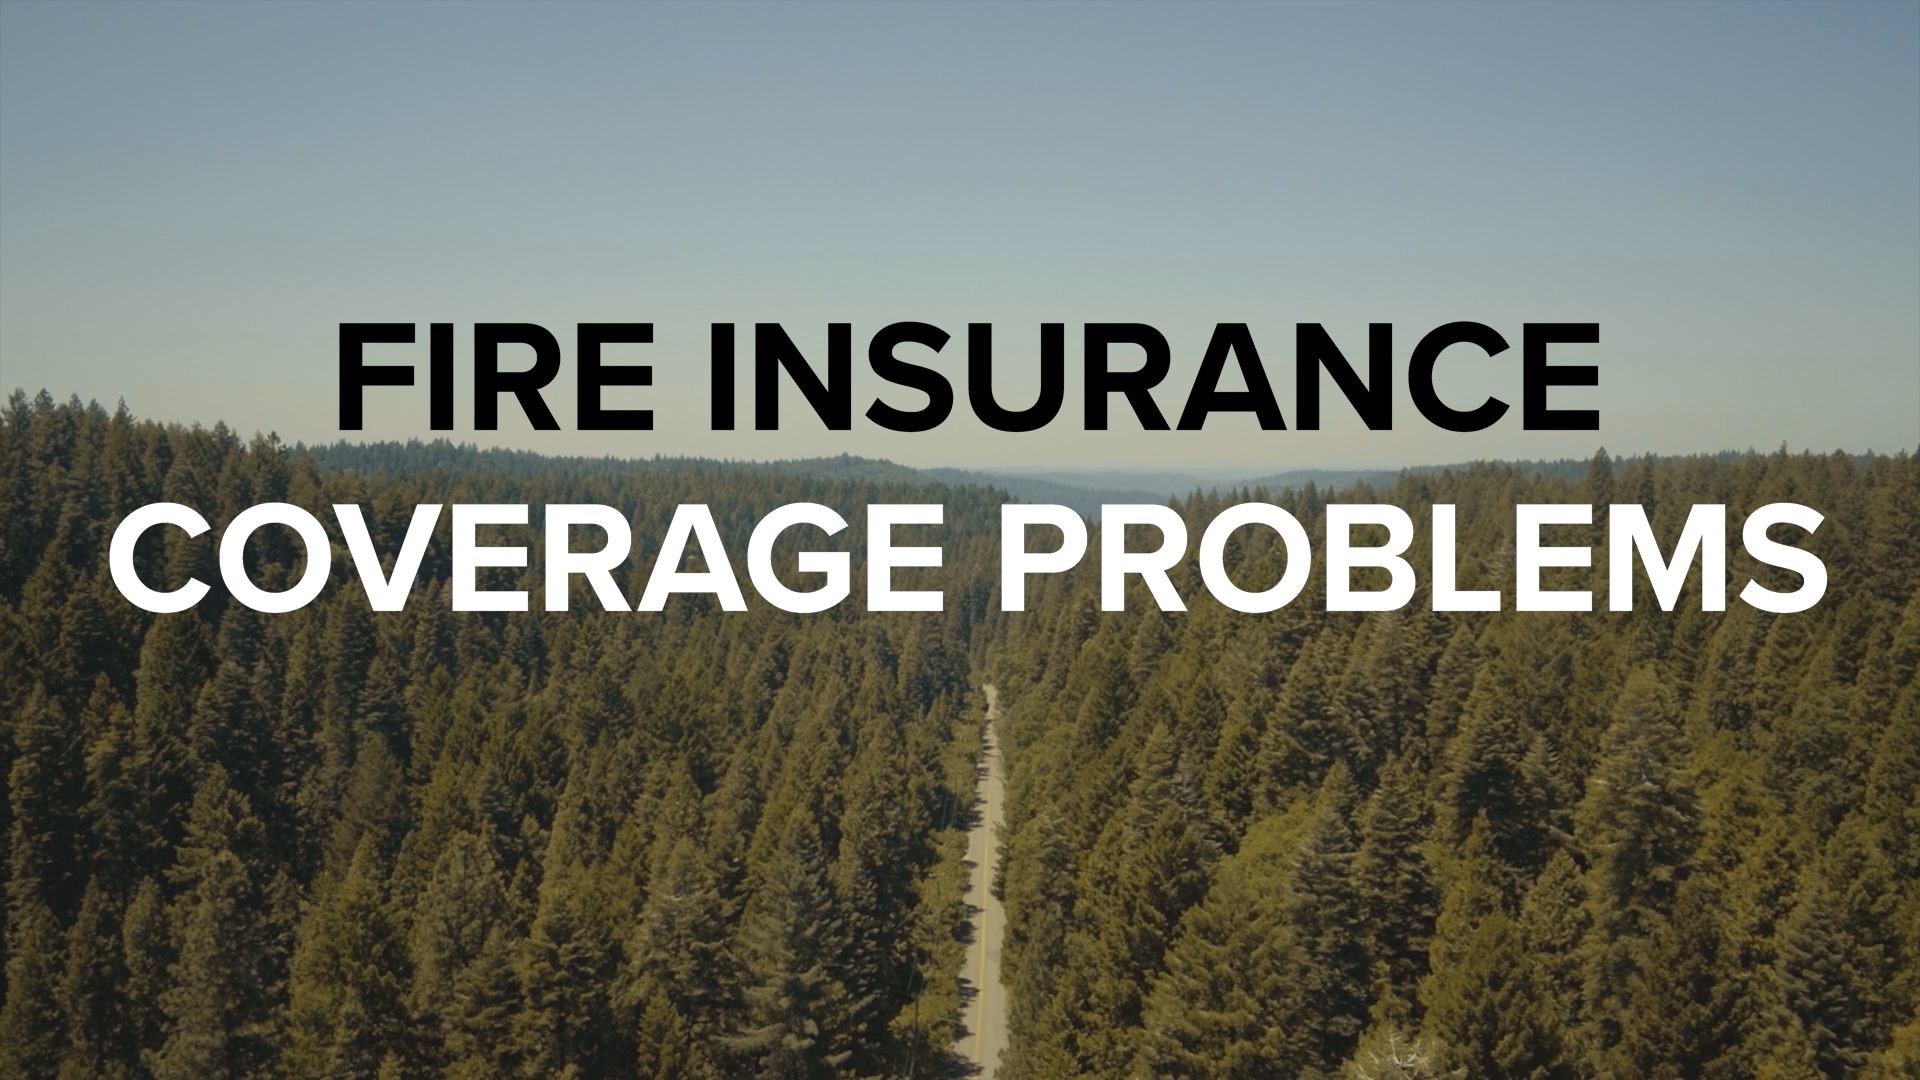 New numbers from the California Department of Insurance highlight a crisis facing homeowners: Insurance companies have been dropping coverage for hundreds of thousands of customers statewide in the face of increasingly frequent and destructive wildfires.